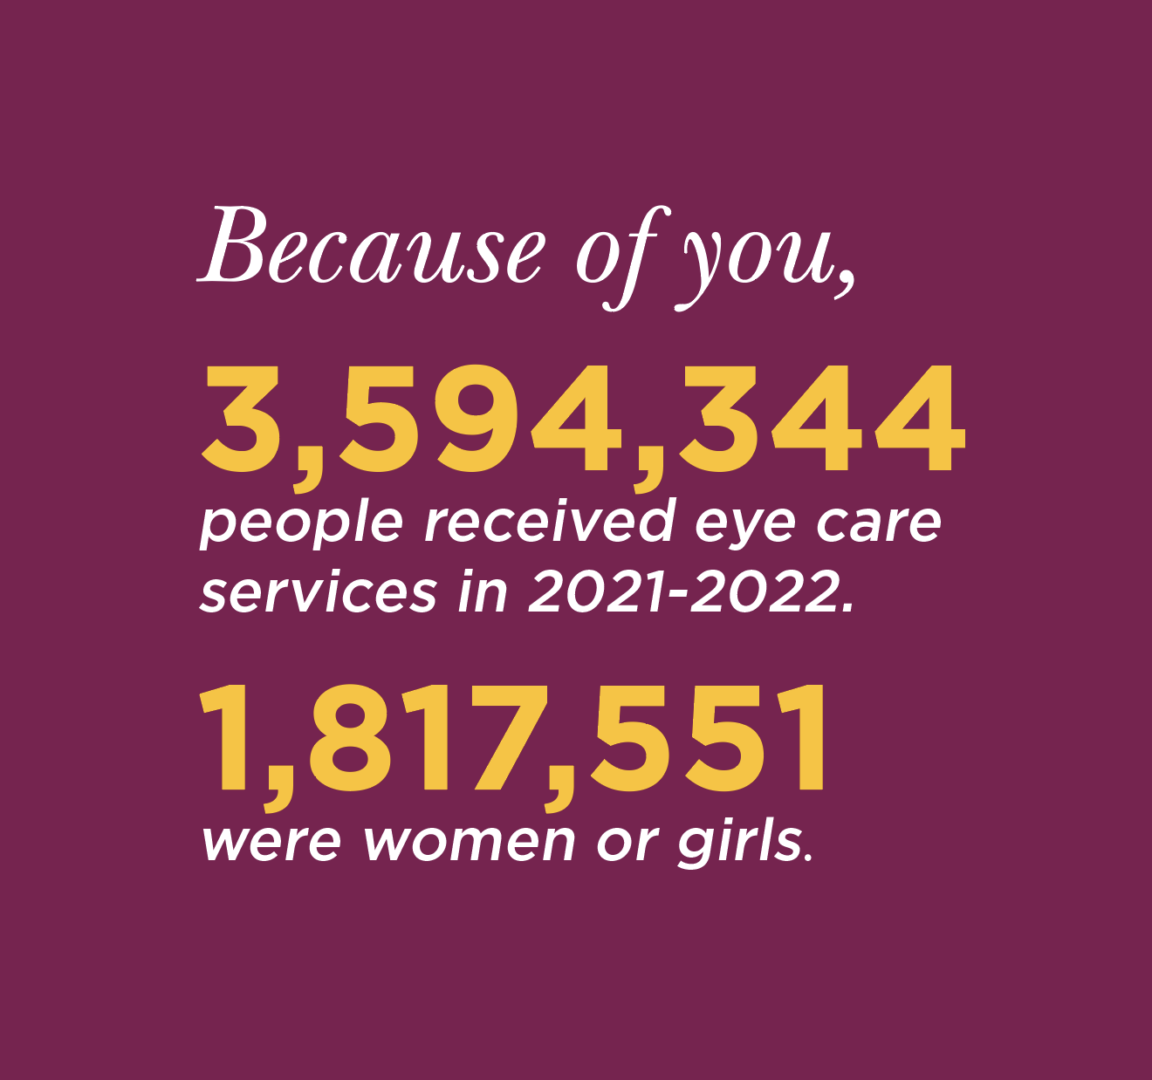 Because of you, 
3,594,344
people received eye care services in 2021-2022.
1,817,551
were women or girls.